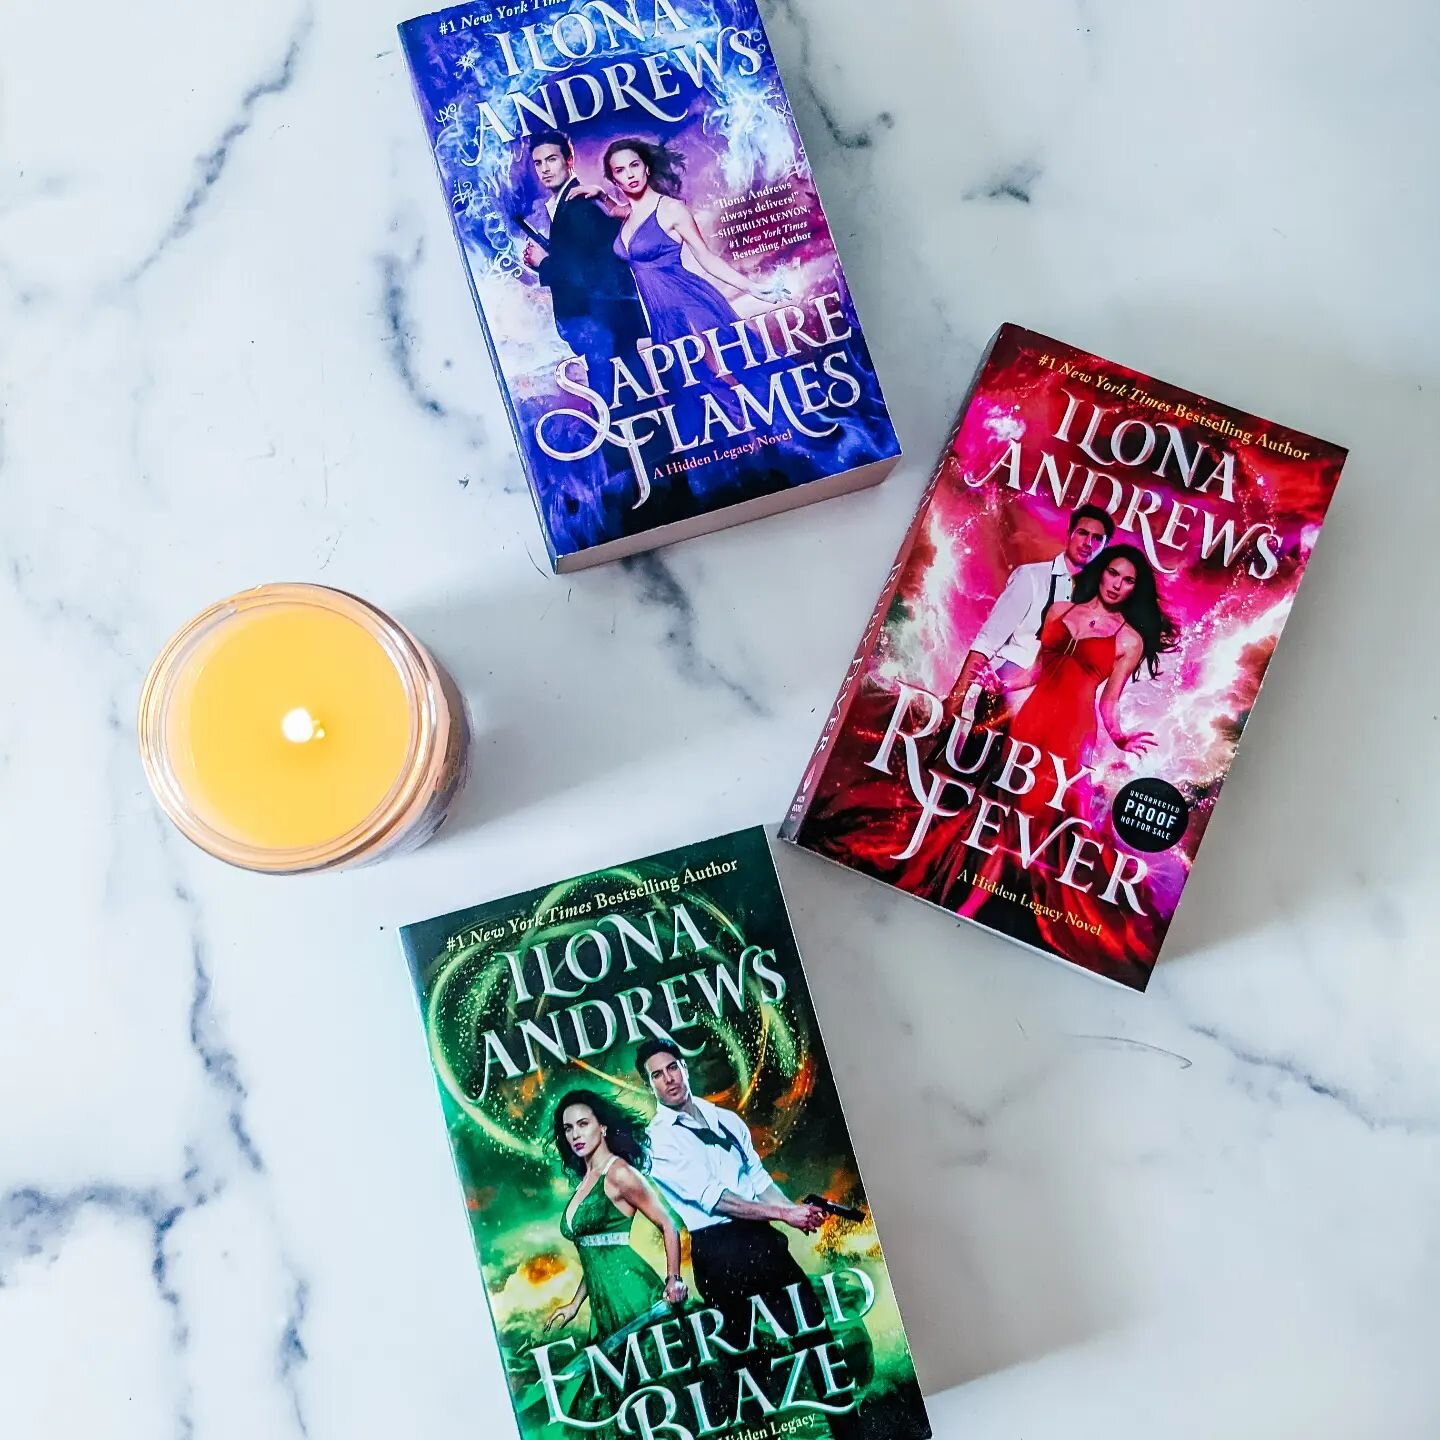 Thank you @avonbooks for the gifted copies!

Early this summer I was on a bad reading slump. I kept trying new books to read and nothing was sticking. 

On a whim, I picked Emerald Blaze and it was just what I needed. 

I love the world that Ilona An